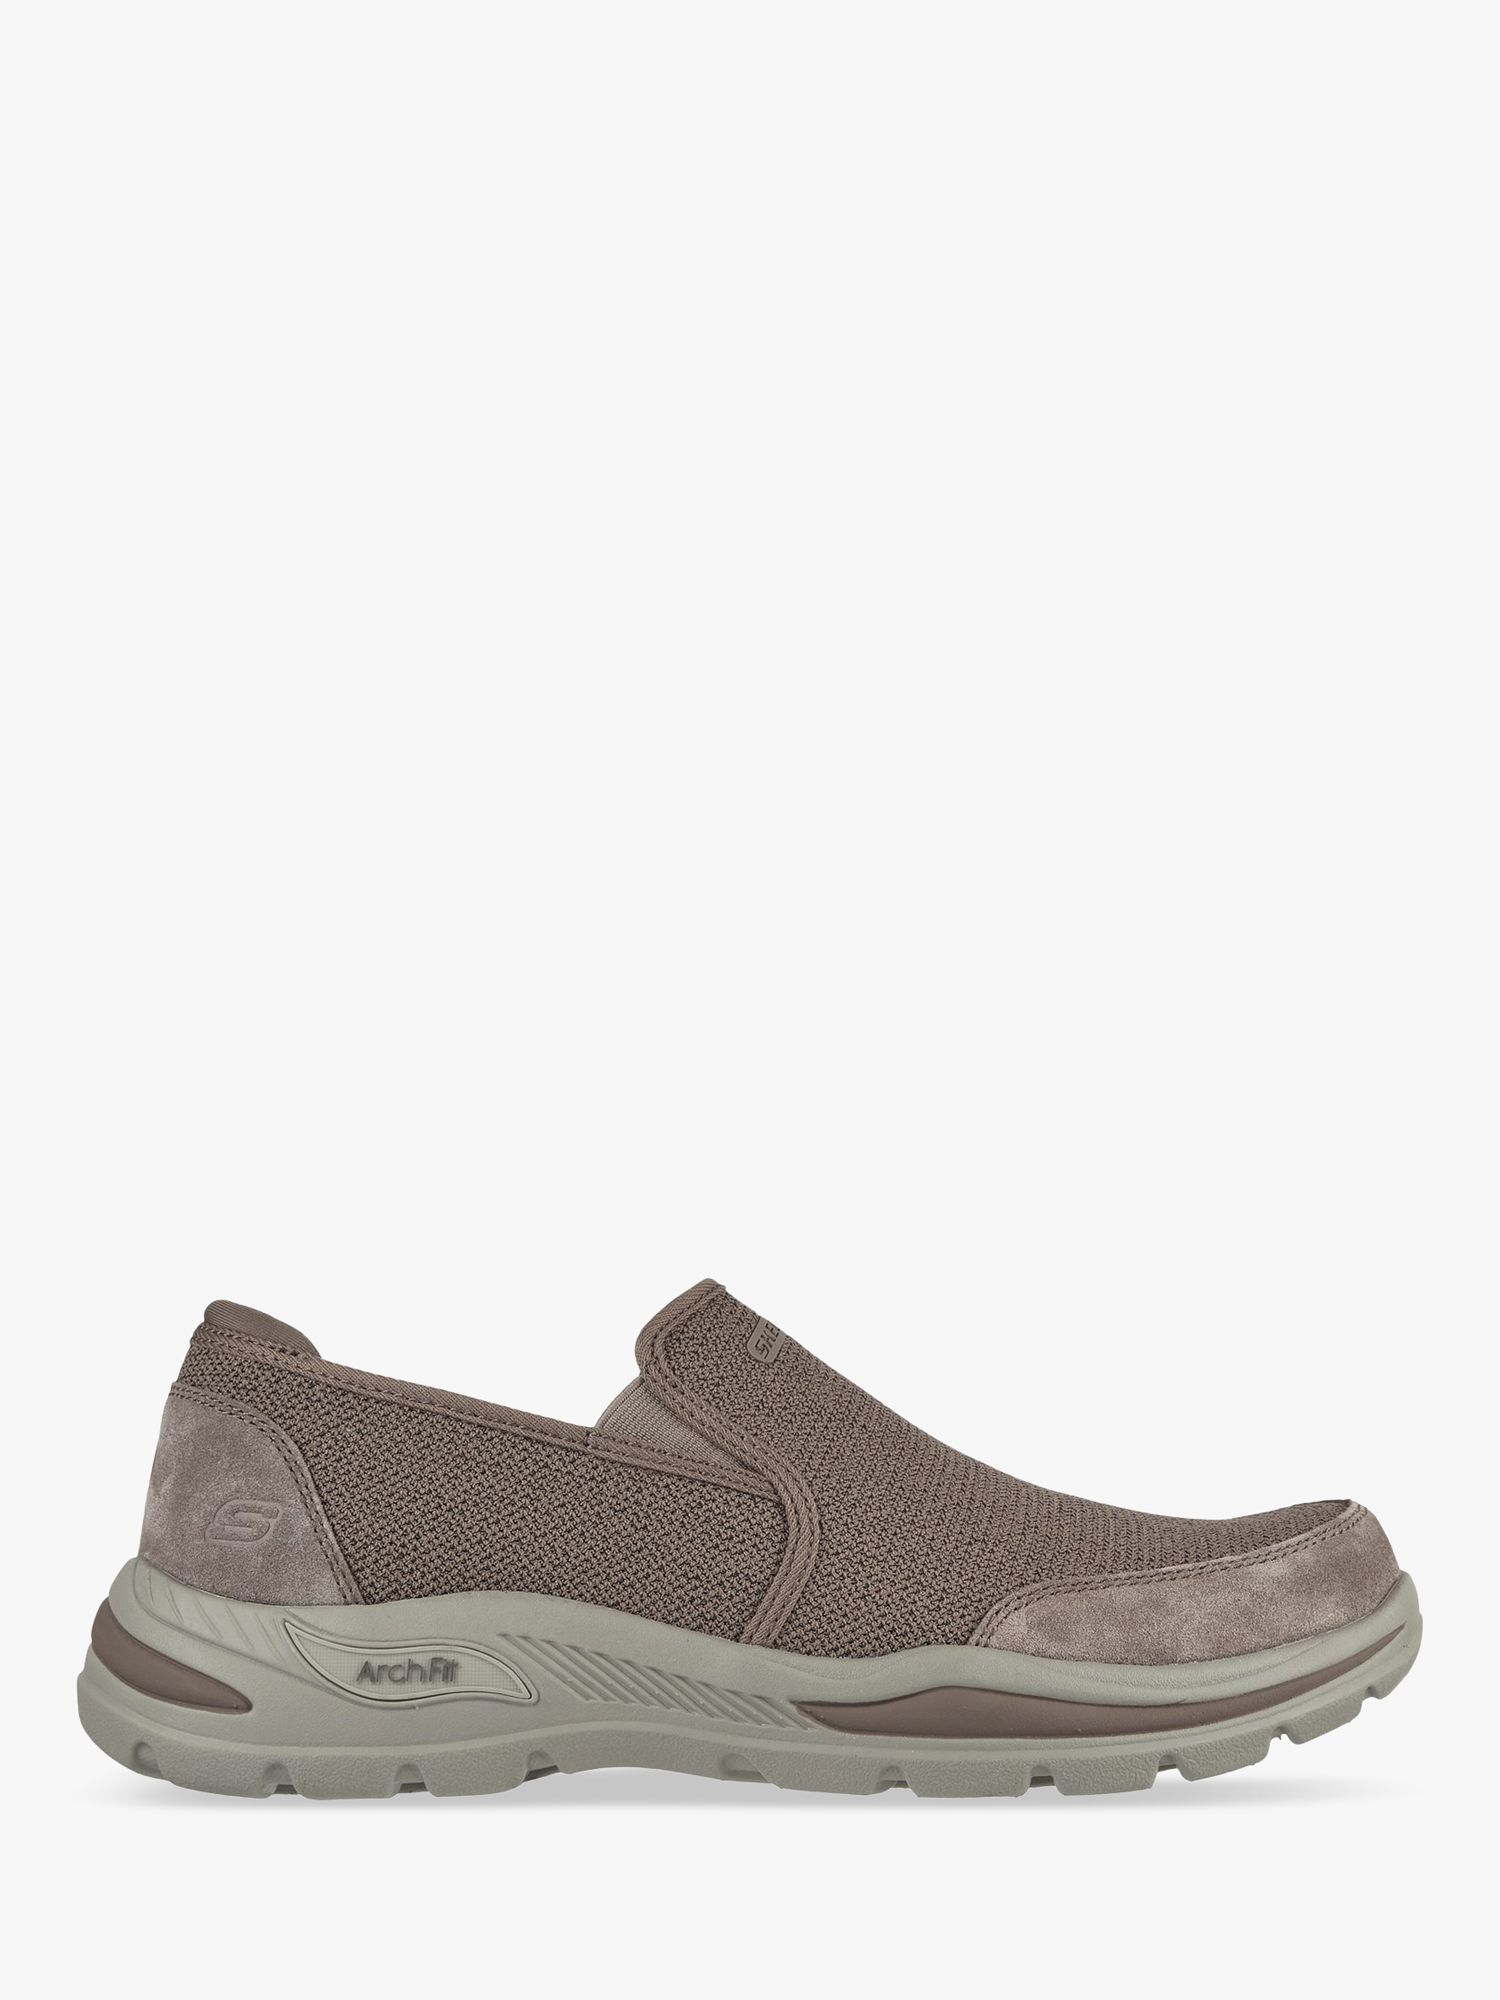 Skechers Relaxed Fit Arch Fit Motley Ratel Slip On Trainers, Light ...